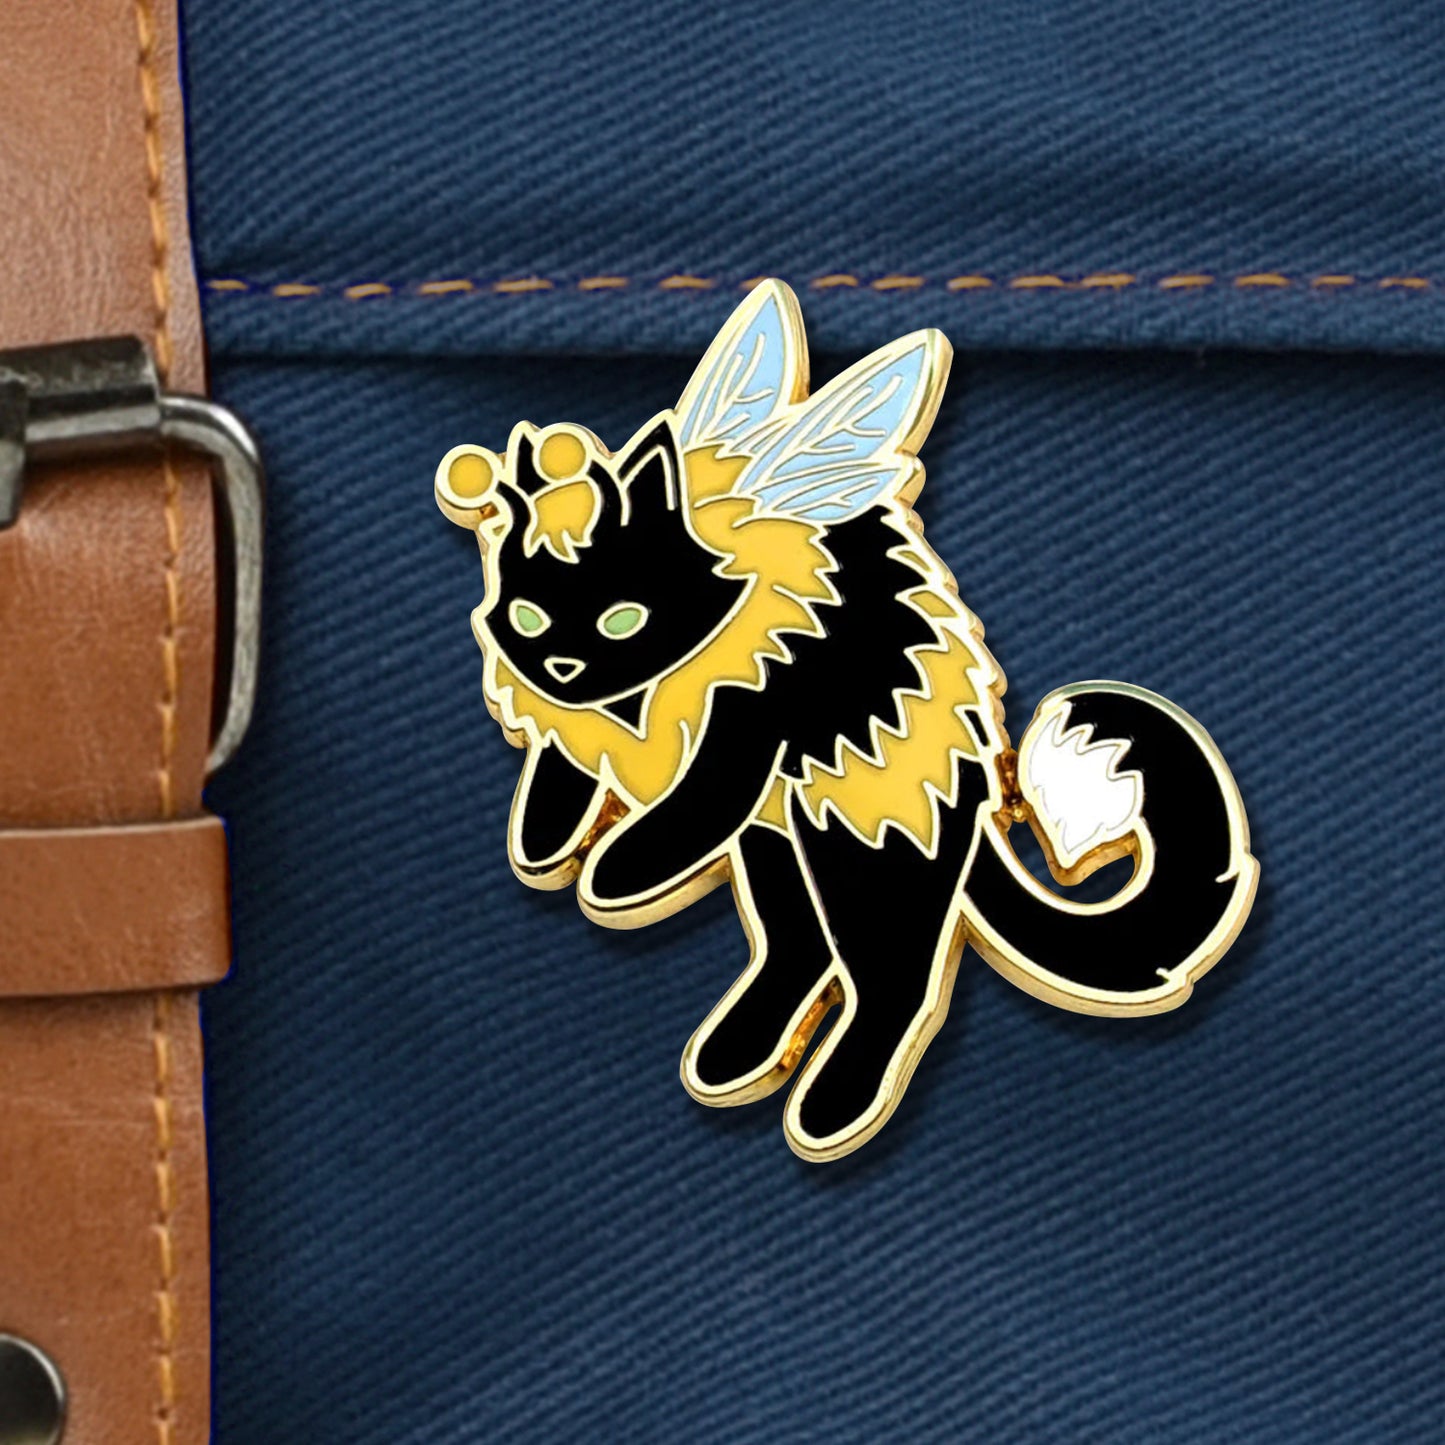 A black-and-yellow 'bumble cat' enamel pin. The pin is roughly in the shape of a fuzzy bumble bee, with a black cat head, tail, and four legs, as well as two small antennae and a small pair of bee wings. The pin is set against a navy canvas bag. 